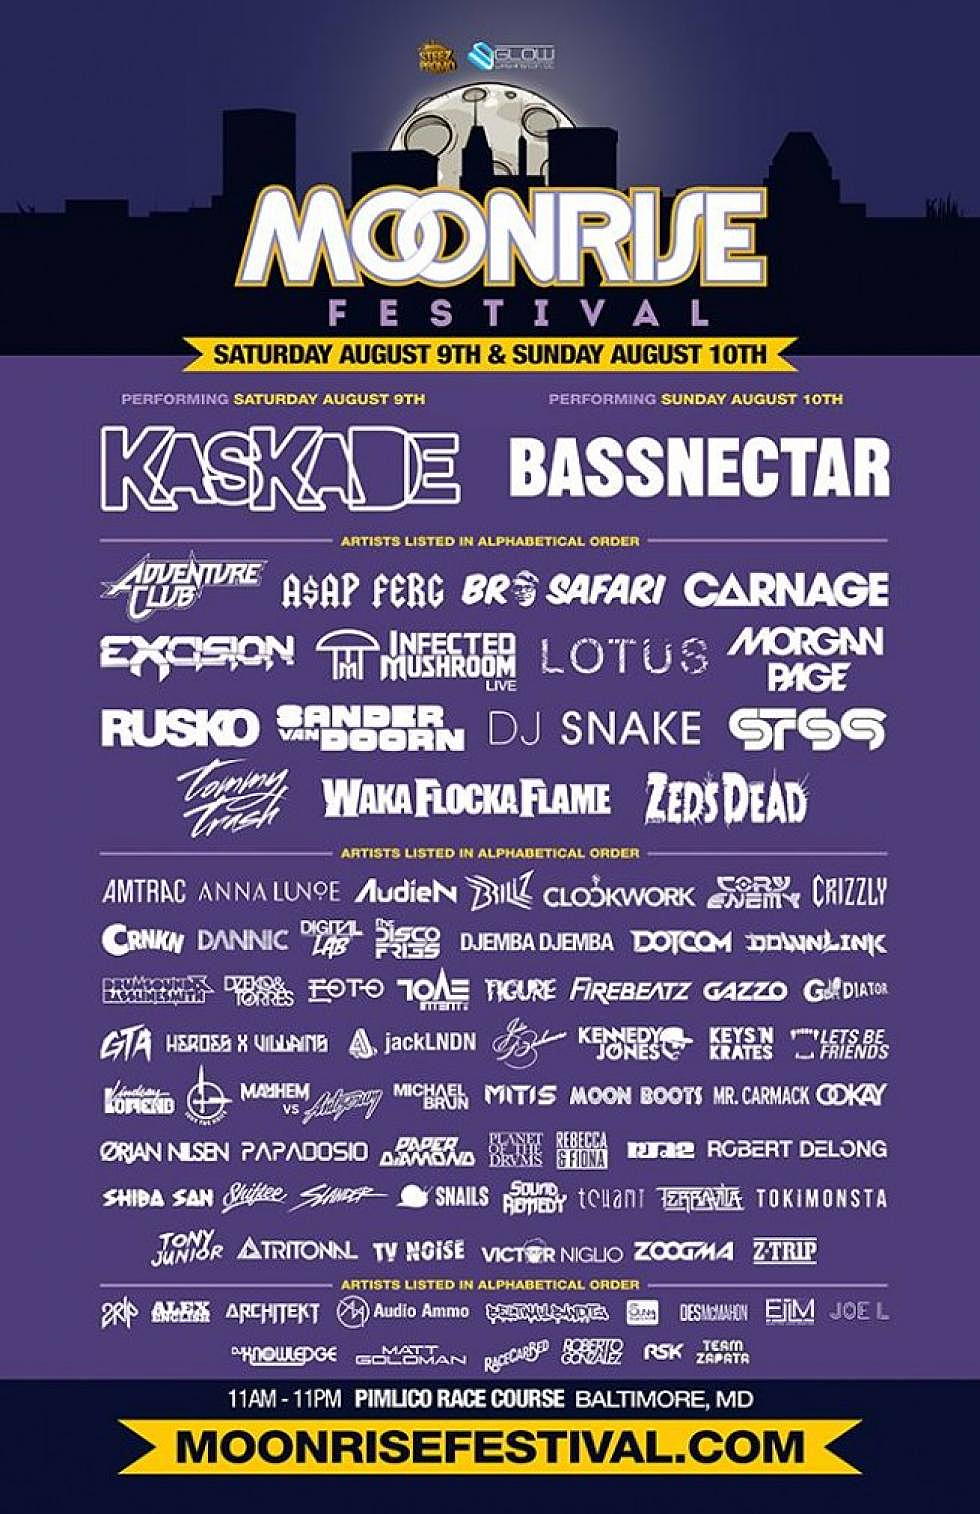 Contest: Win a pair of tickets to Moonrise Festival!